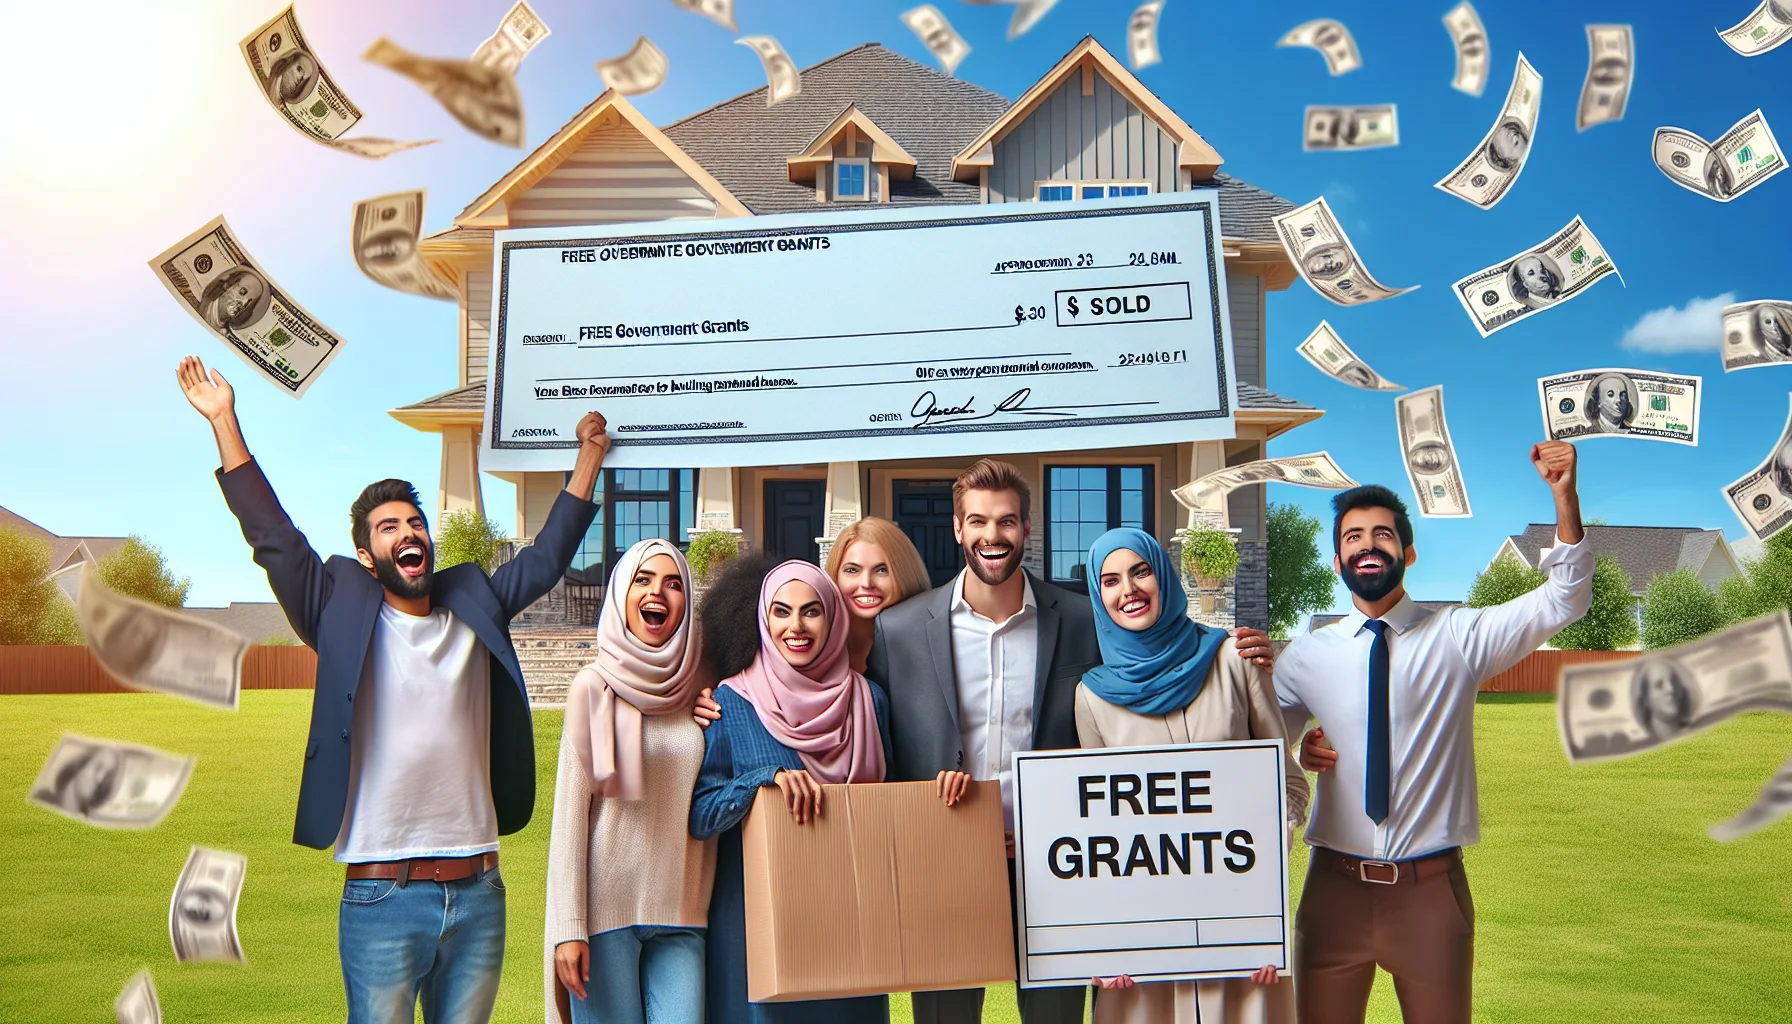 Imagine a jovial scene displaying a perfect scenario in real estate. Picture a diverse range of people, including a Middle-Eastern woman and a Caucasian man, standing on a lush green lawn outside a newly-constructed house. They're holding giant checks, symbolizing free government grants for building houses. Their faces are beaming with pure joy. In the background, paperwork of approved grants is haphazardly flying in the air, representing easy approval. The house stands beautifully with fine architectural details, symbolizing quality construction, nestled against a bright sunny sky. A 'Sold' sign sits proudly on the front lawn.